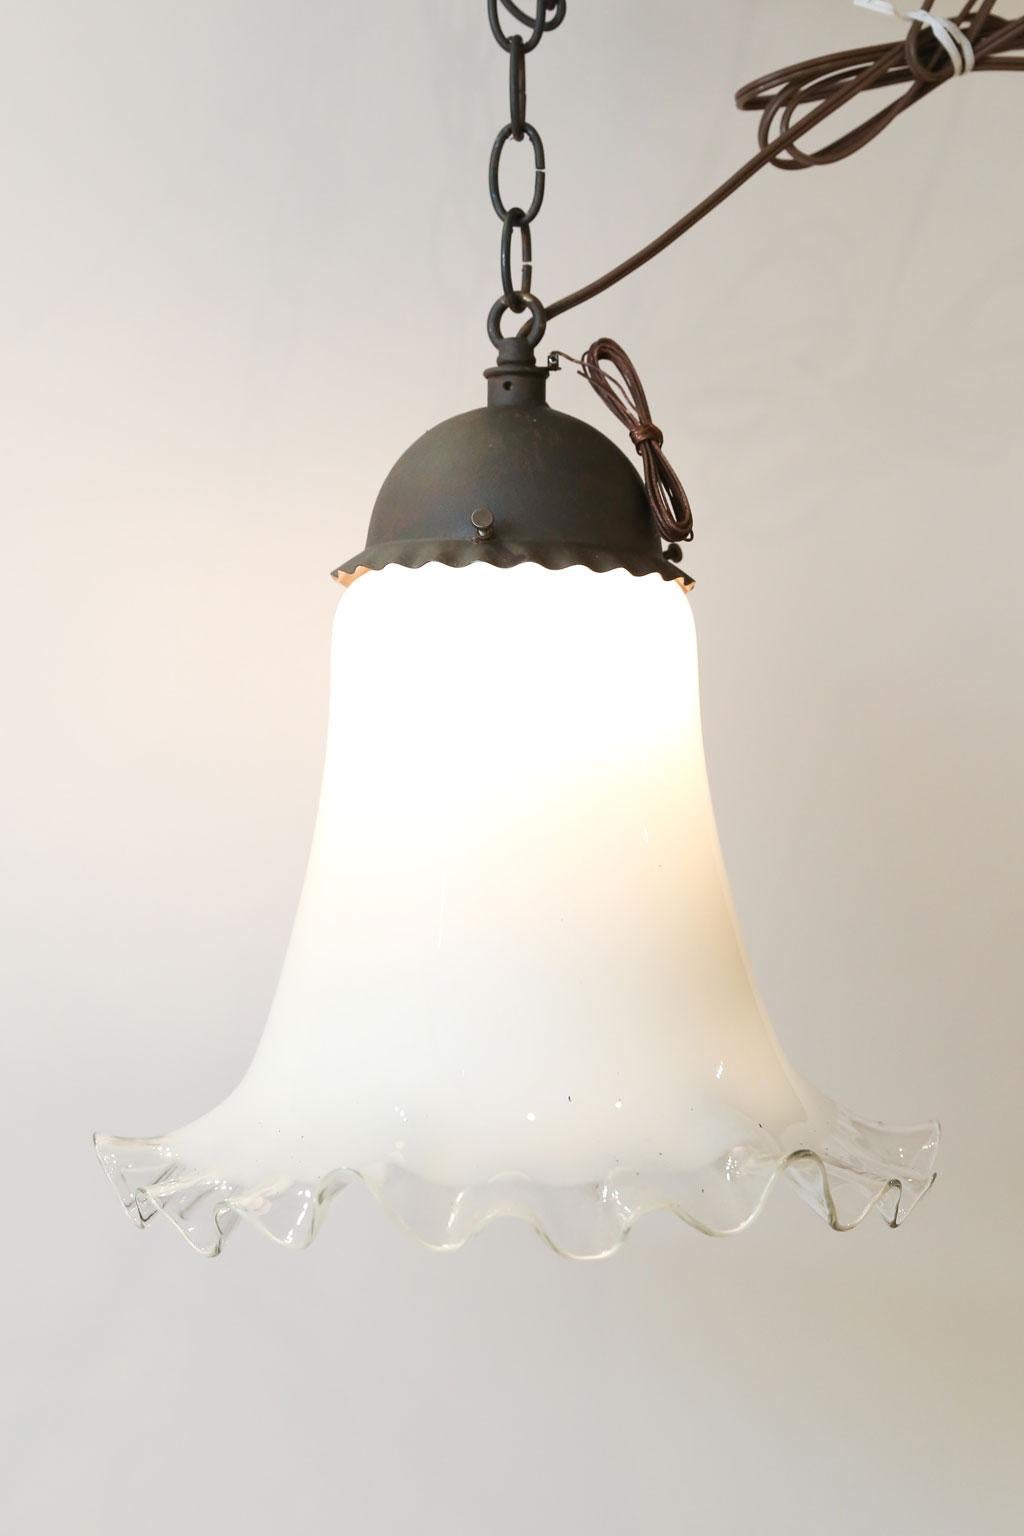 Antique Italian single light: Nice old iron pendant fixture with antique milk glass bell-shape shade. White color of shade turns clear on a gradient towards the lower edge and is shaped with a ruffle. Newly wired for use within the USA. Includes